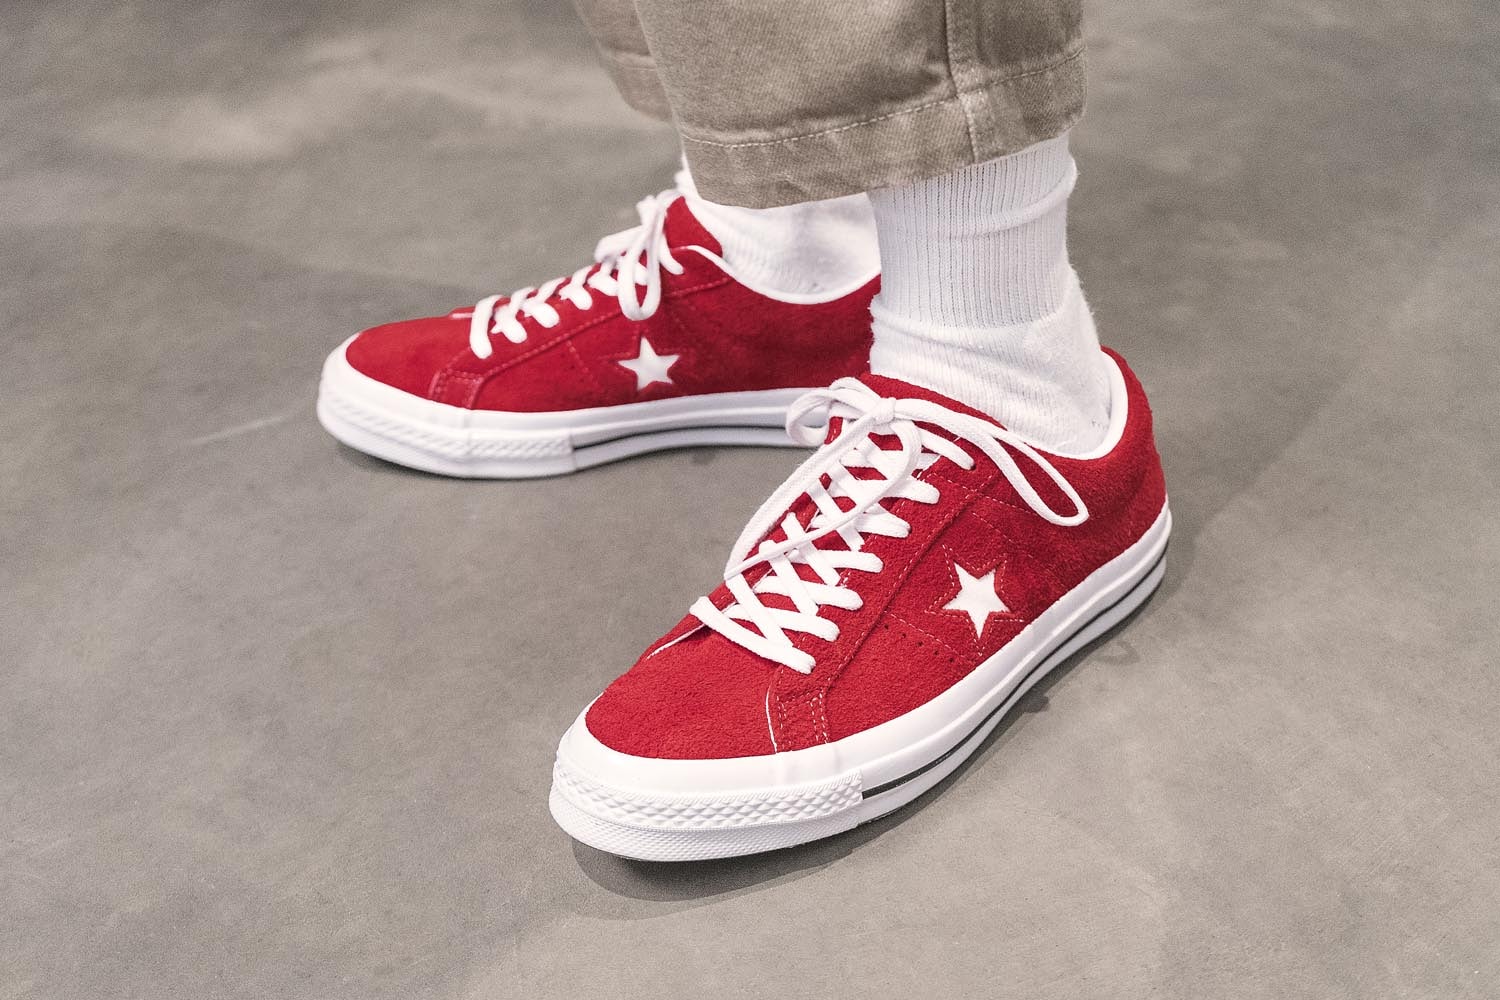 The History Behind the Converse One Star